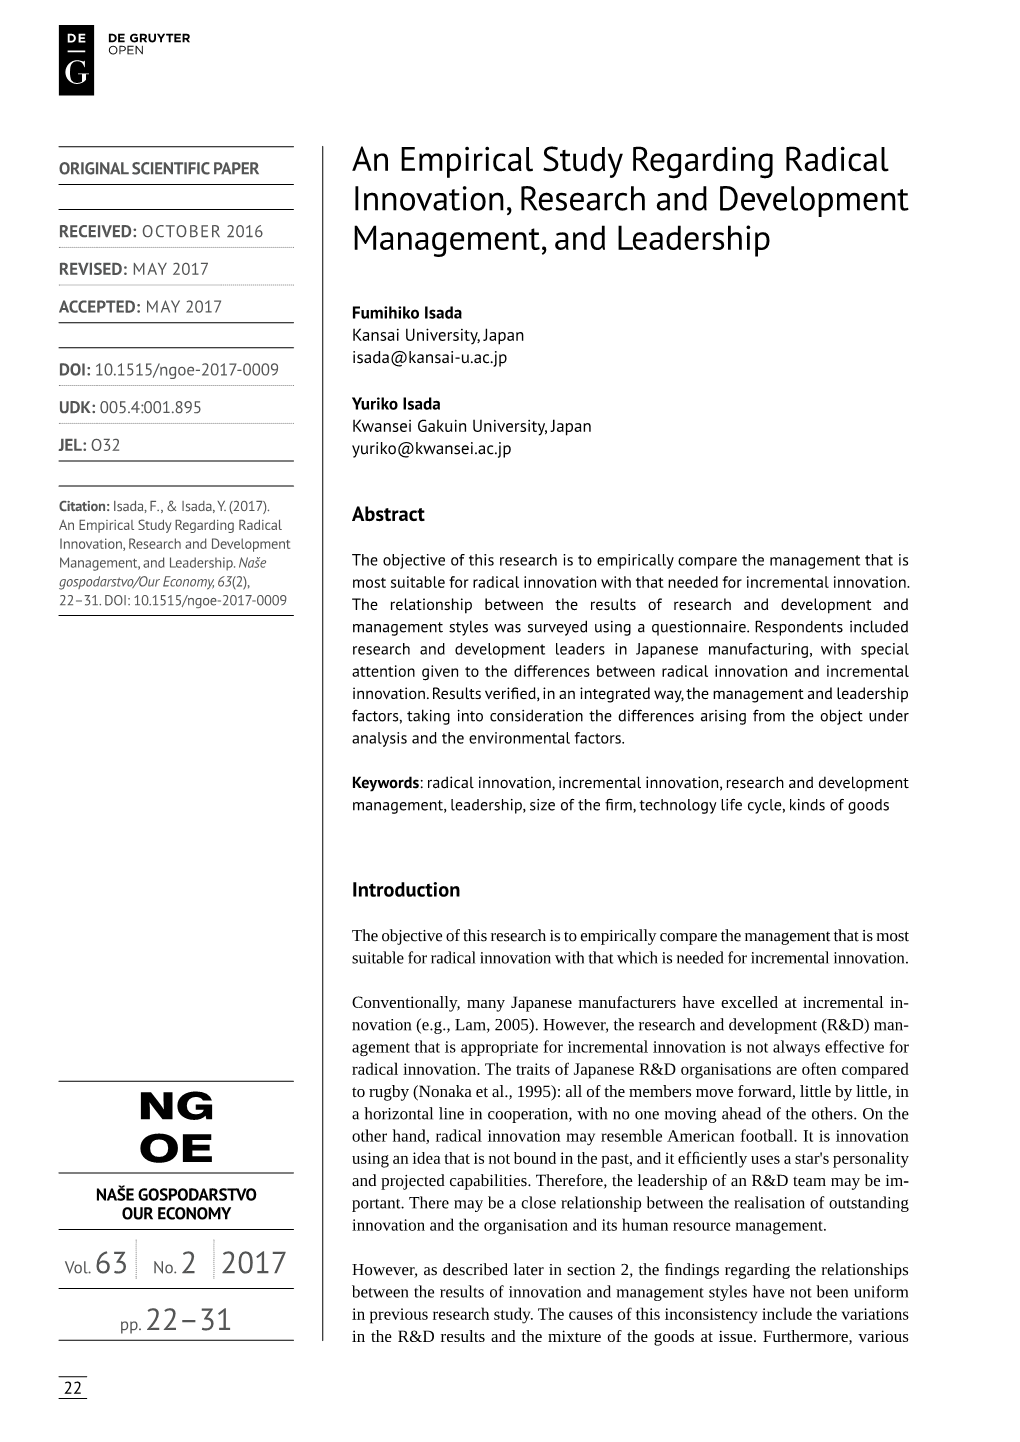 An Empirical Study Regarding Radical Innovation, Research and Development RECEIVED: OCTOBER 2016 Management, and Leadership REVISED: MAY 2017